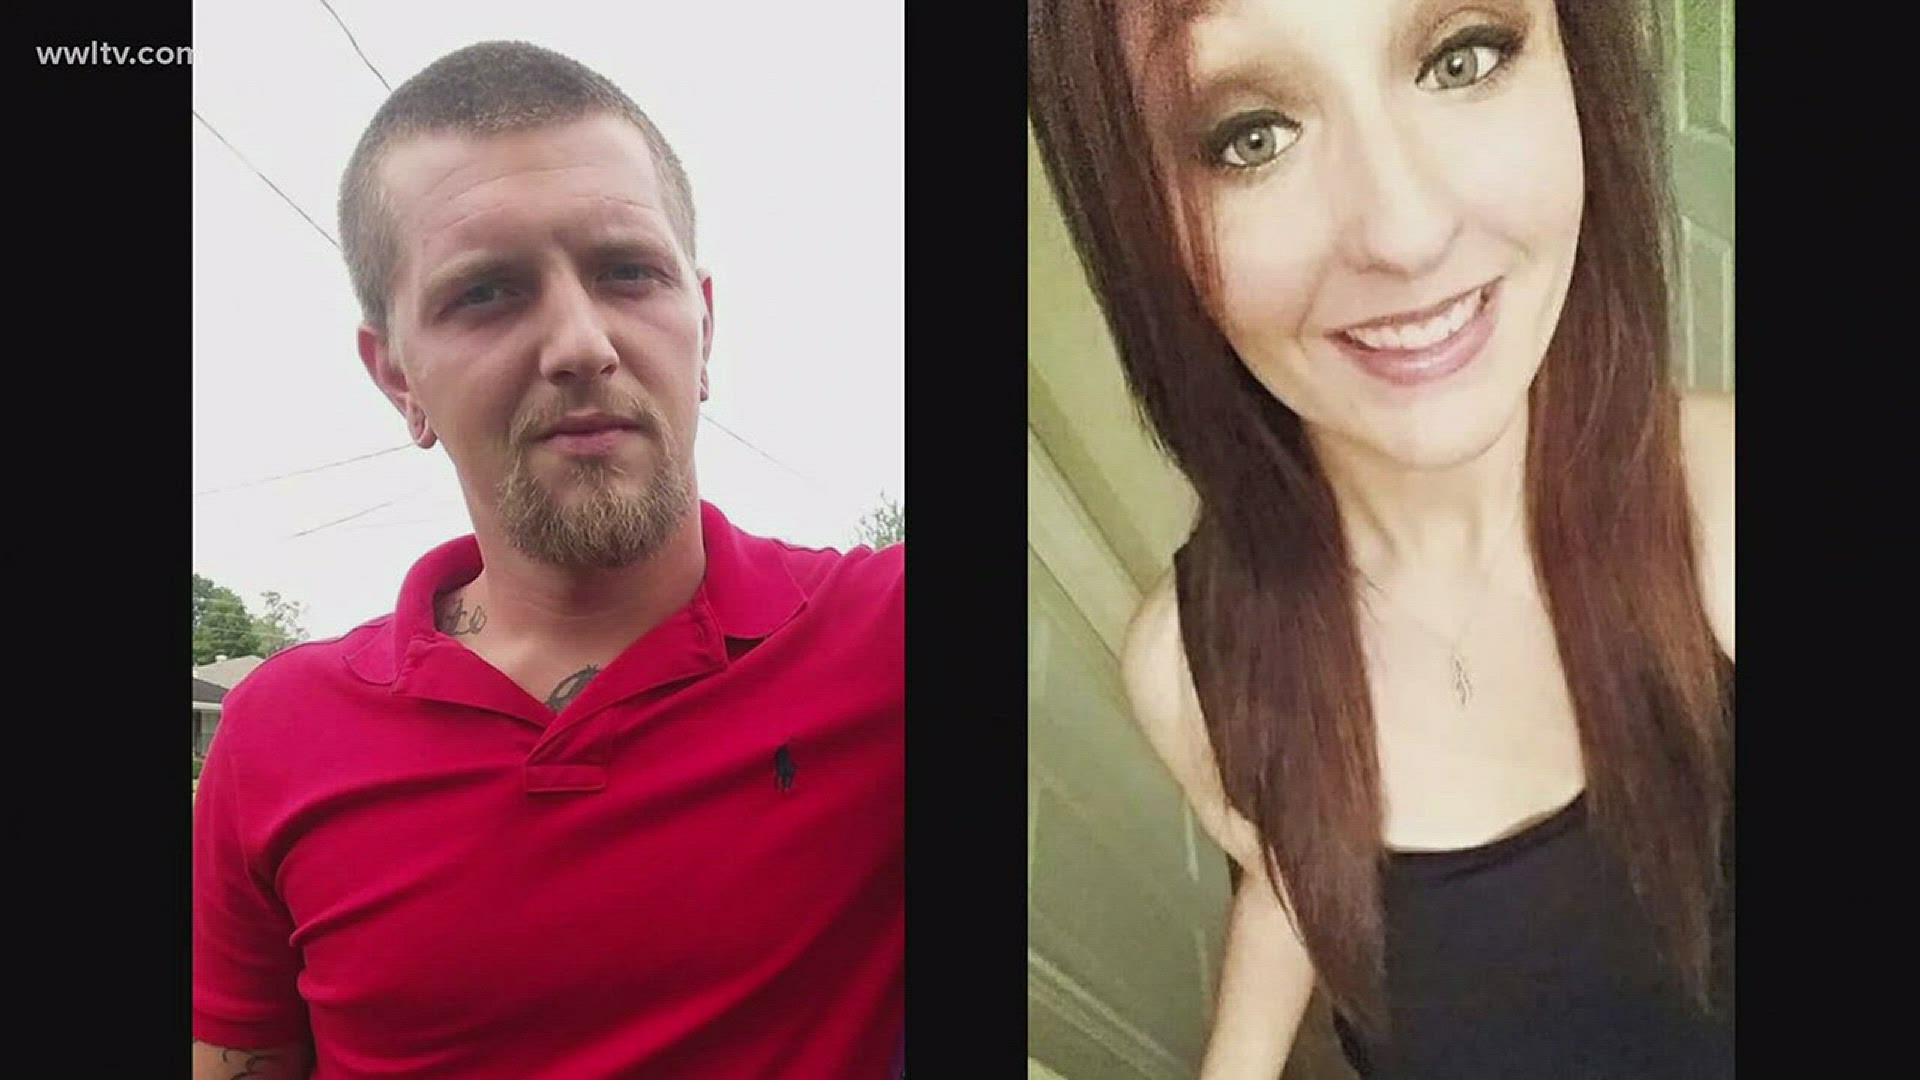 The coroner identified the bodies of 20-year-old Raegan Day and 28-year-old Dustin Hartline.